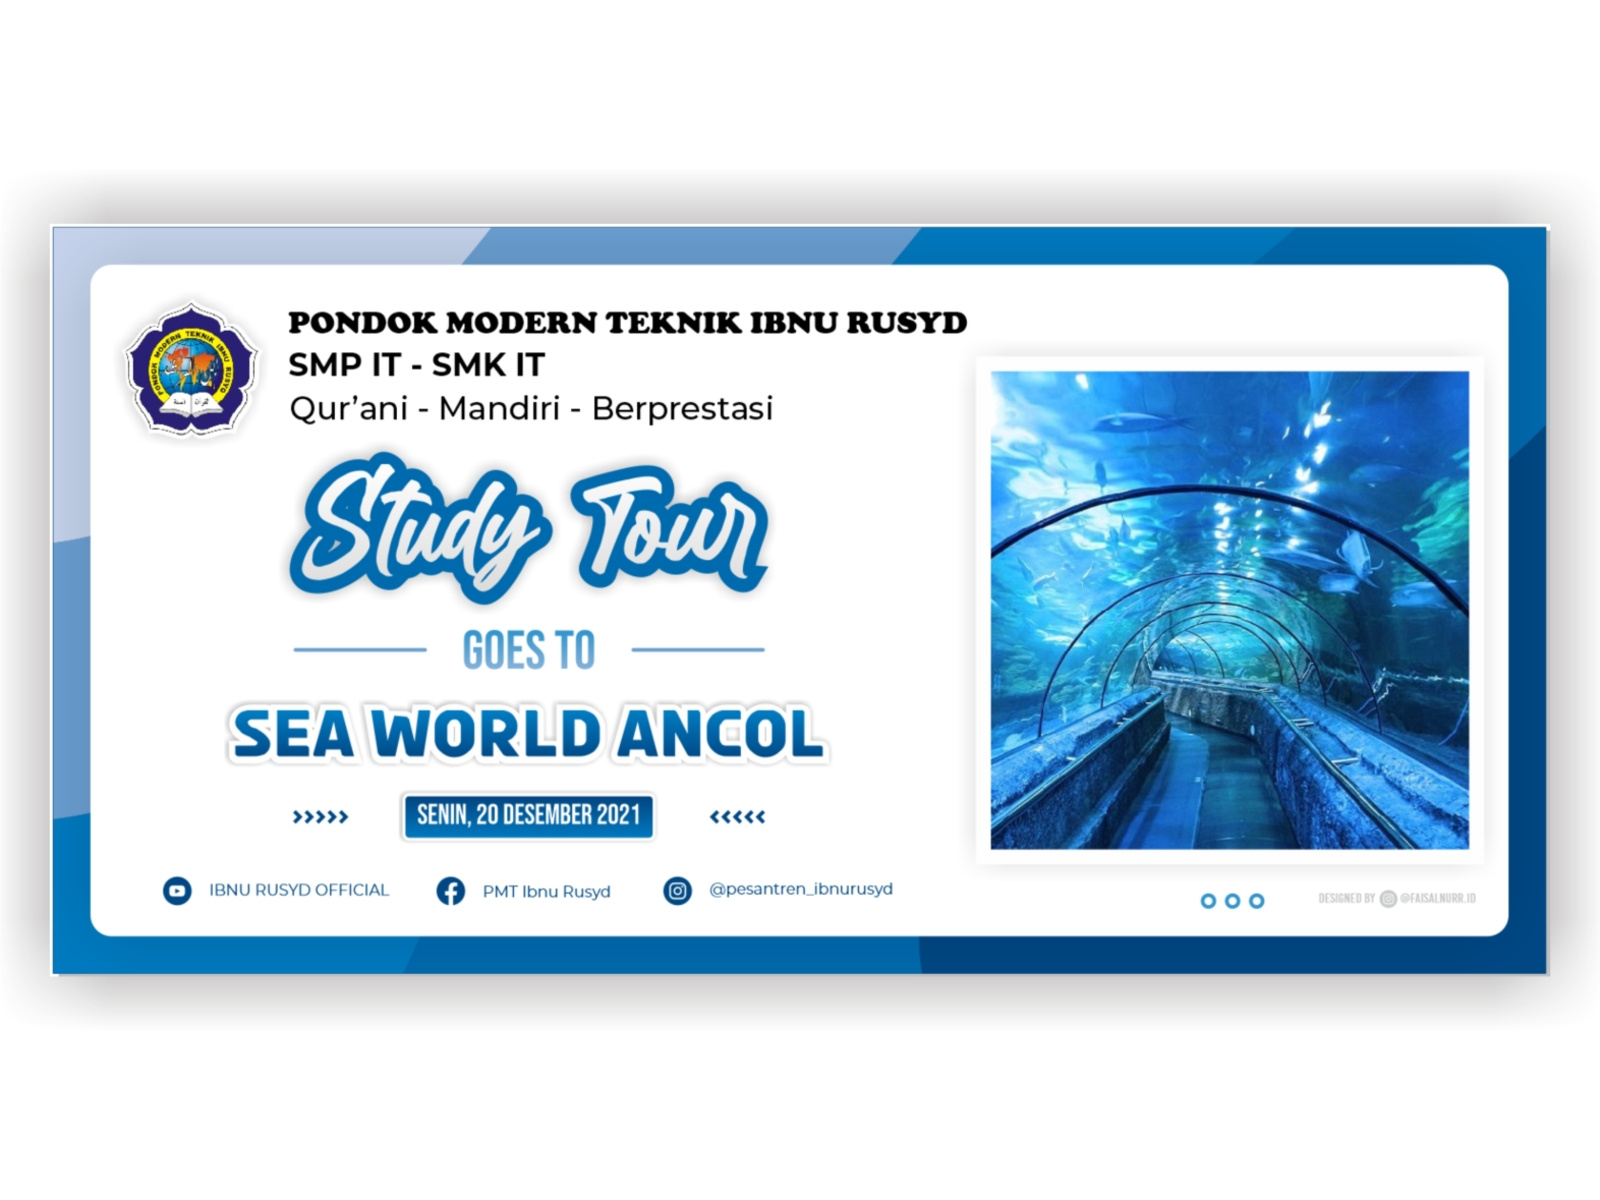 Study Tour Banner by Faisal Nur on Dribbble